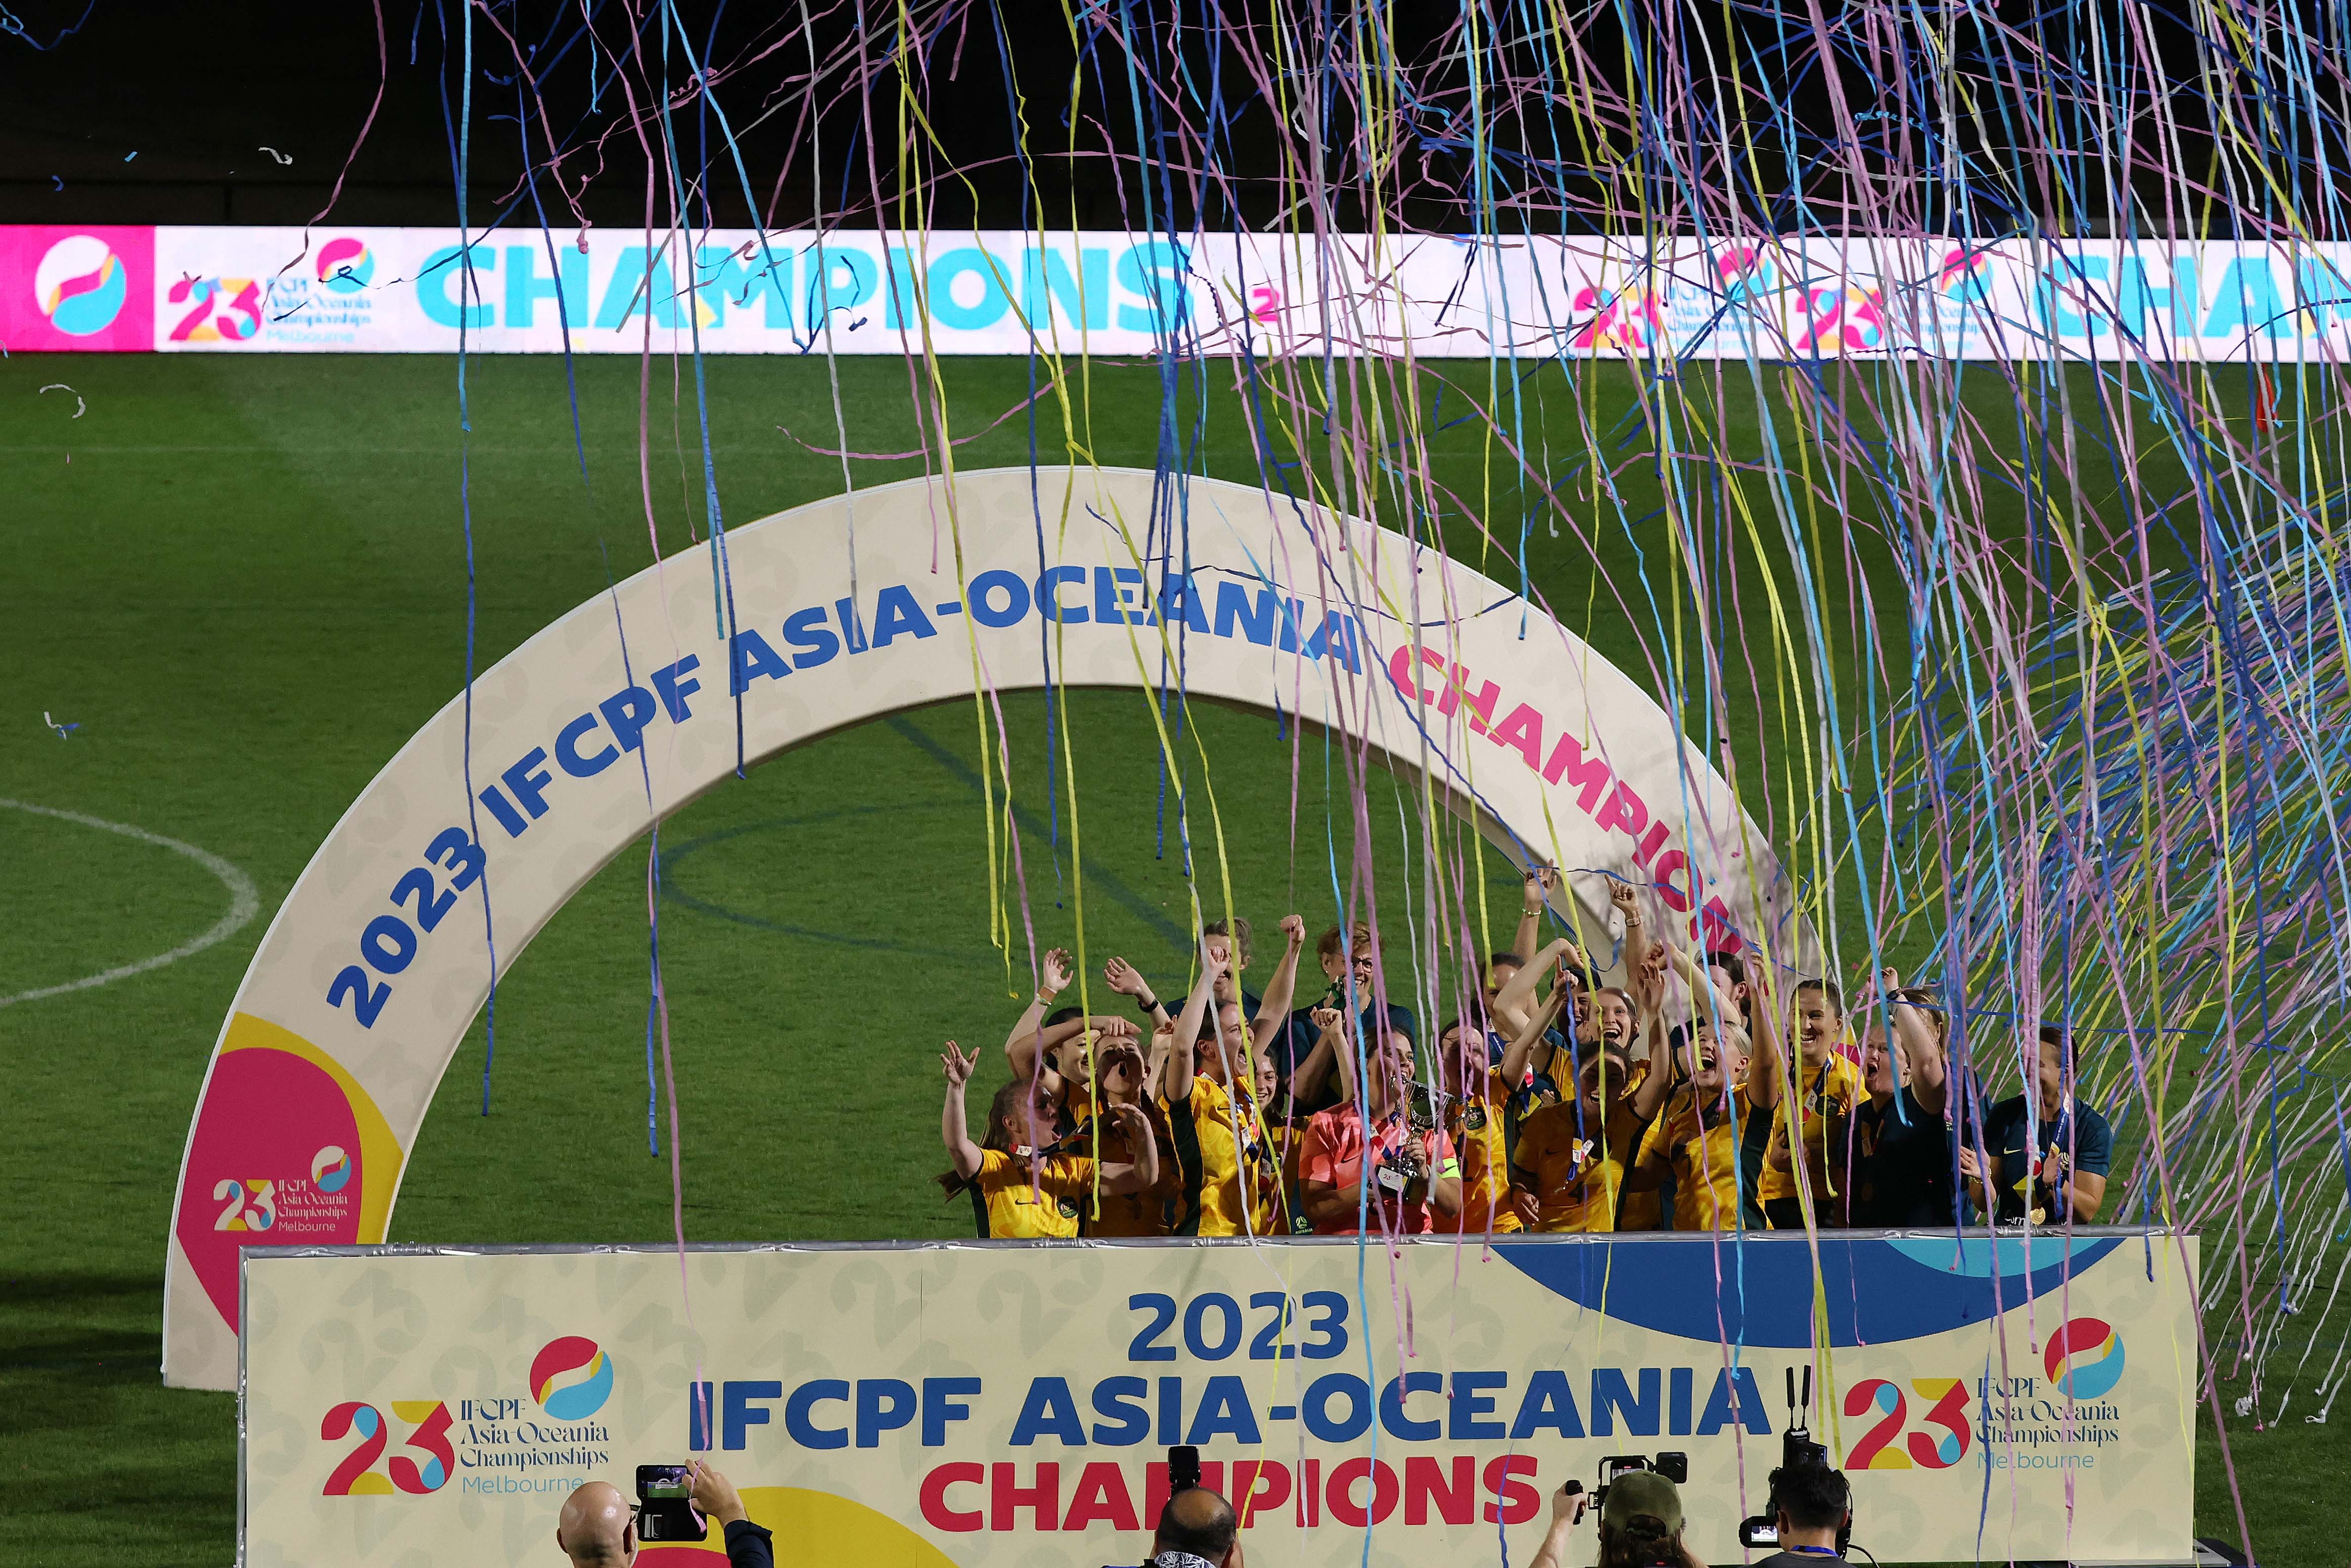 Australia's ParaMatildas celebrate their win during the IFCPF Asia-Oceania Championships Women's Final match between Australia and Japan on November 10, 2023 in Melbourne, Australia. (Photo by Con Chronis/Getty Images for Football Australia)